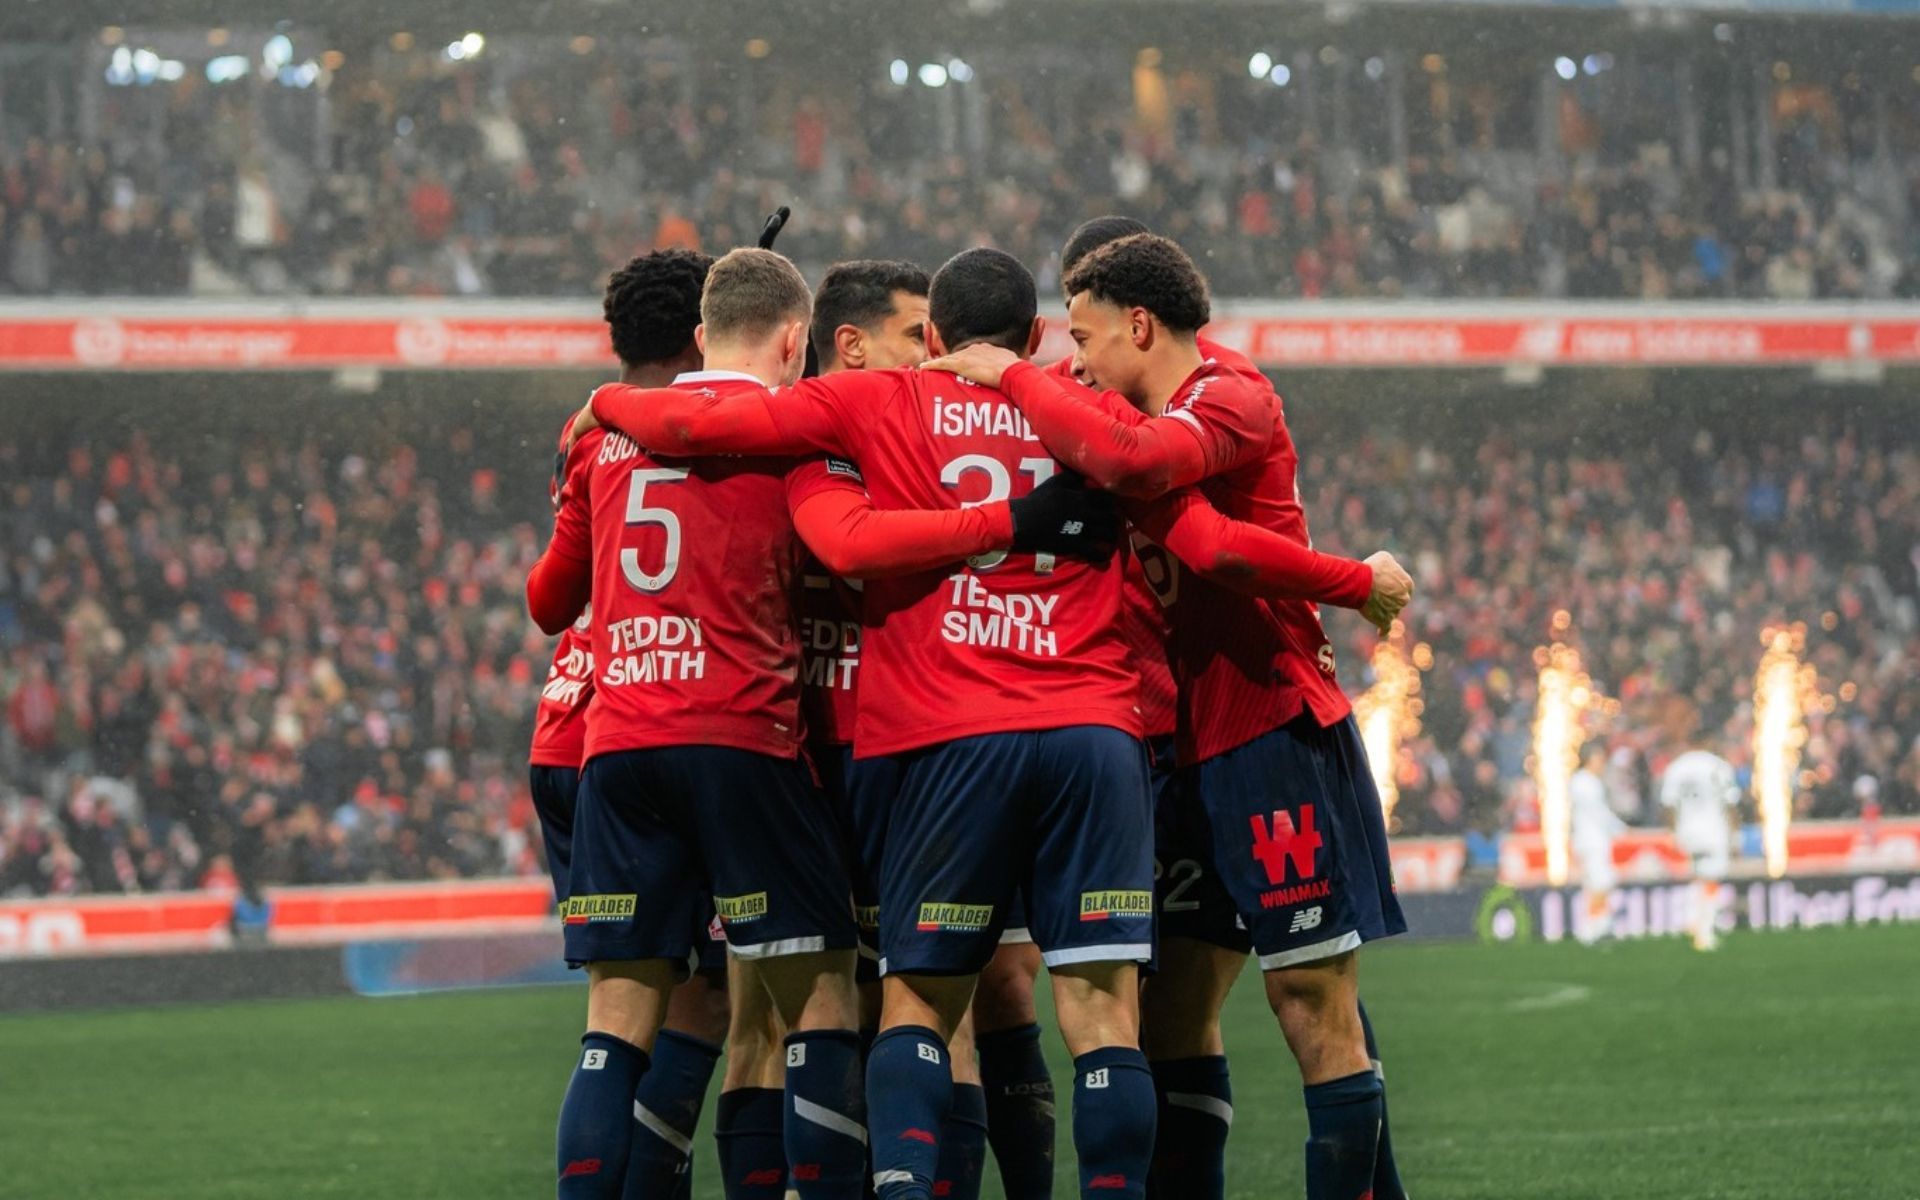 Lille will be hopeful of a positive result this weekend